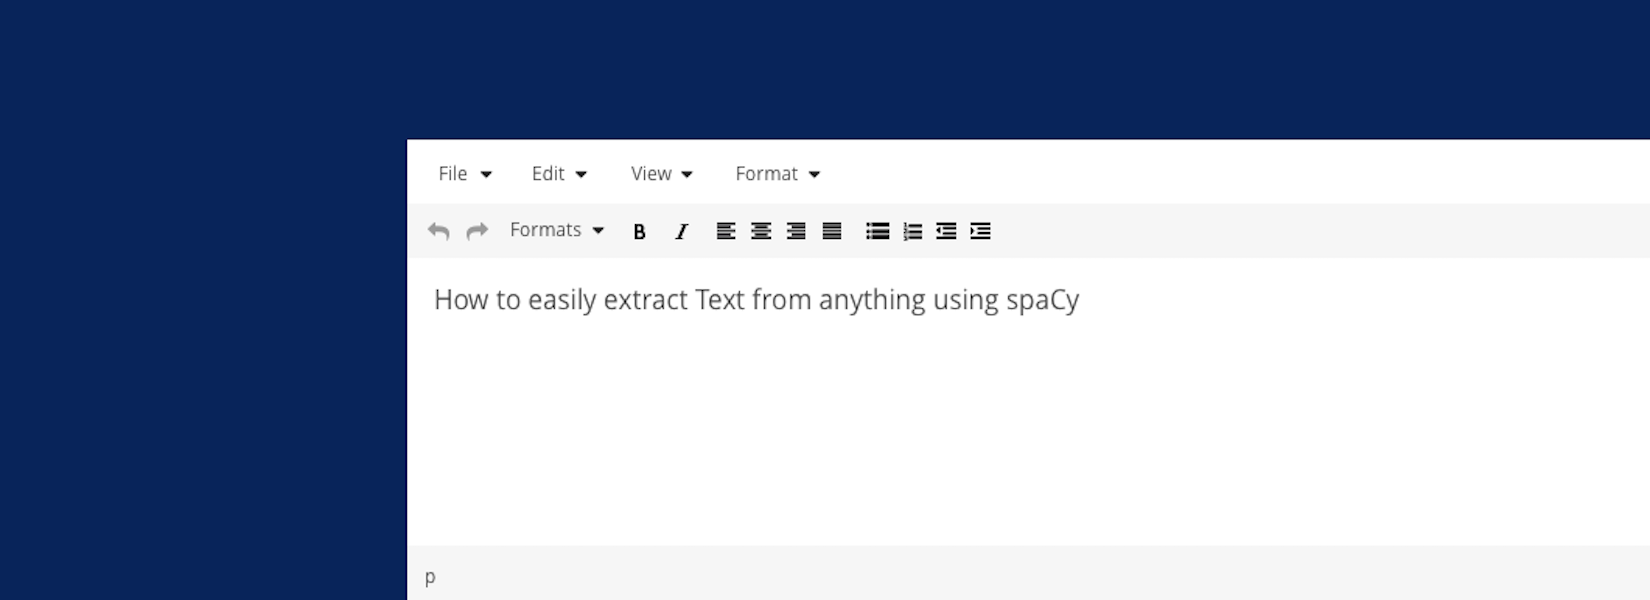 How to easily extract Text from anything using spaCy